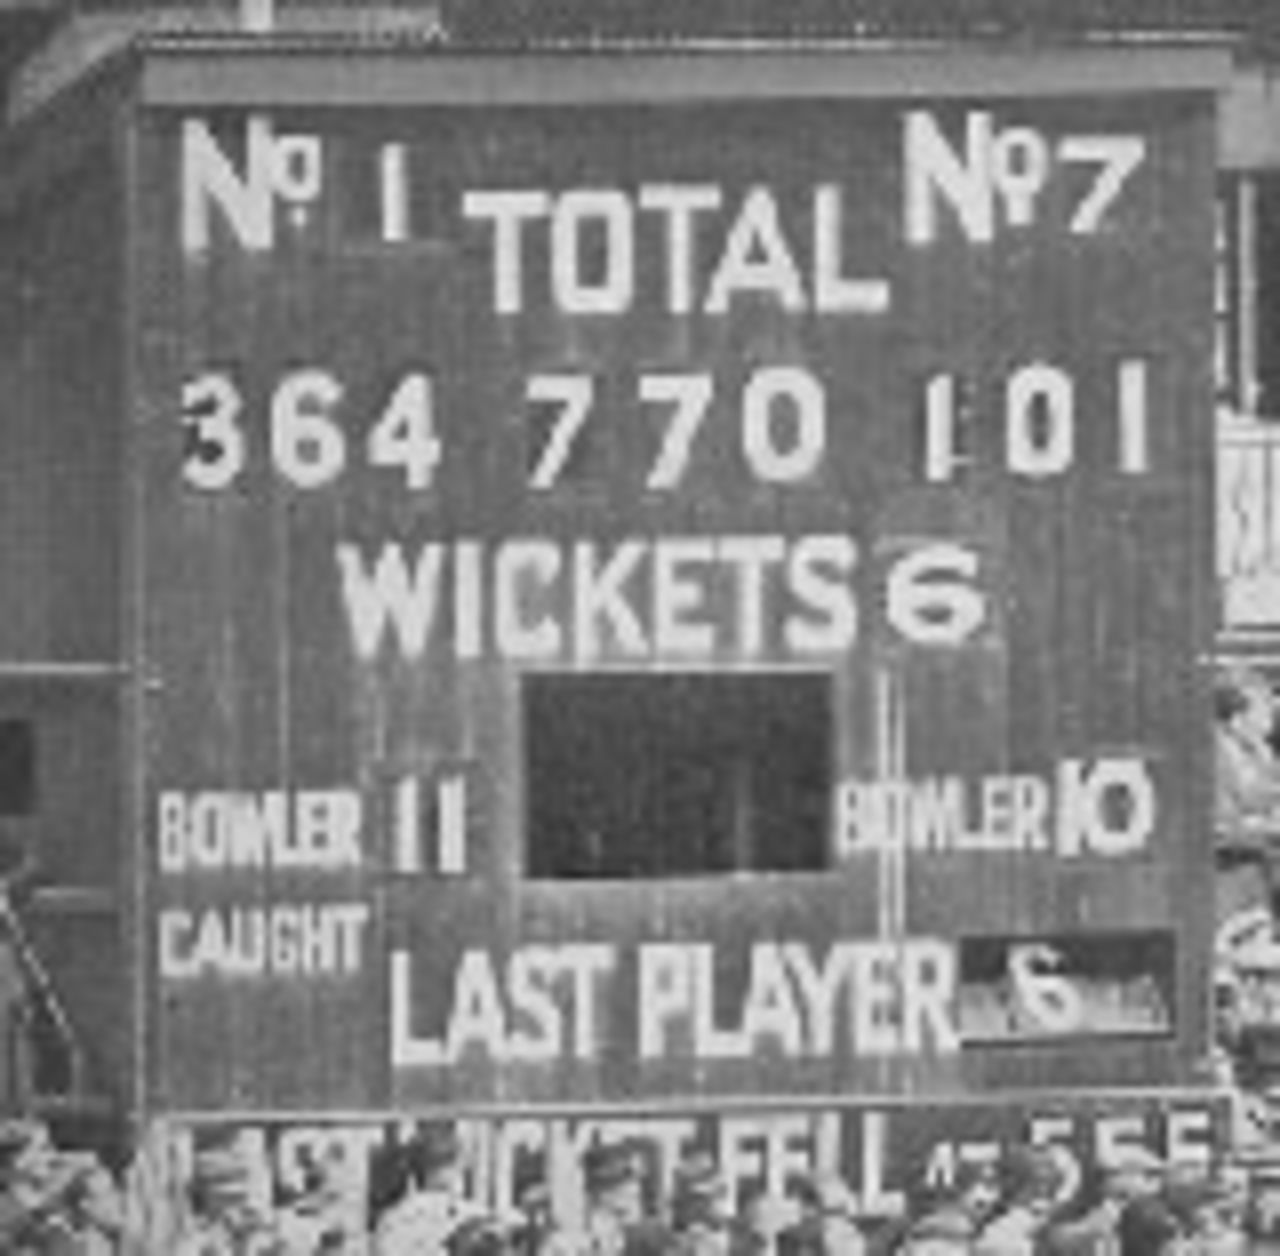 The Oval scoreboard after Len Hutton's dismissal, England v Australia, 5th Test, The Oval, August 1938